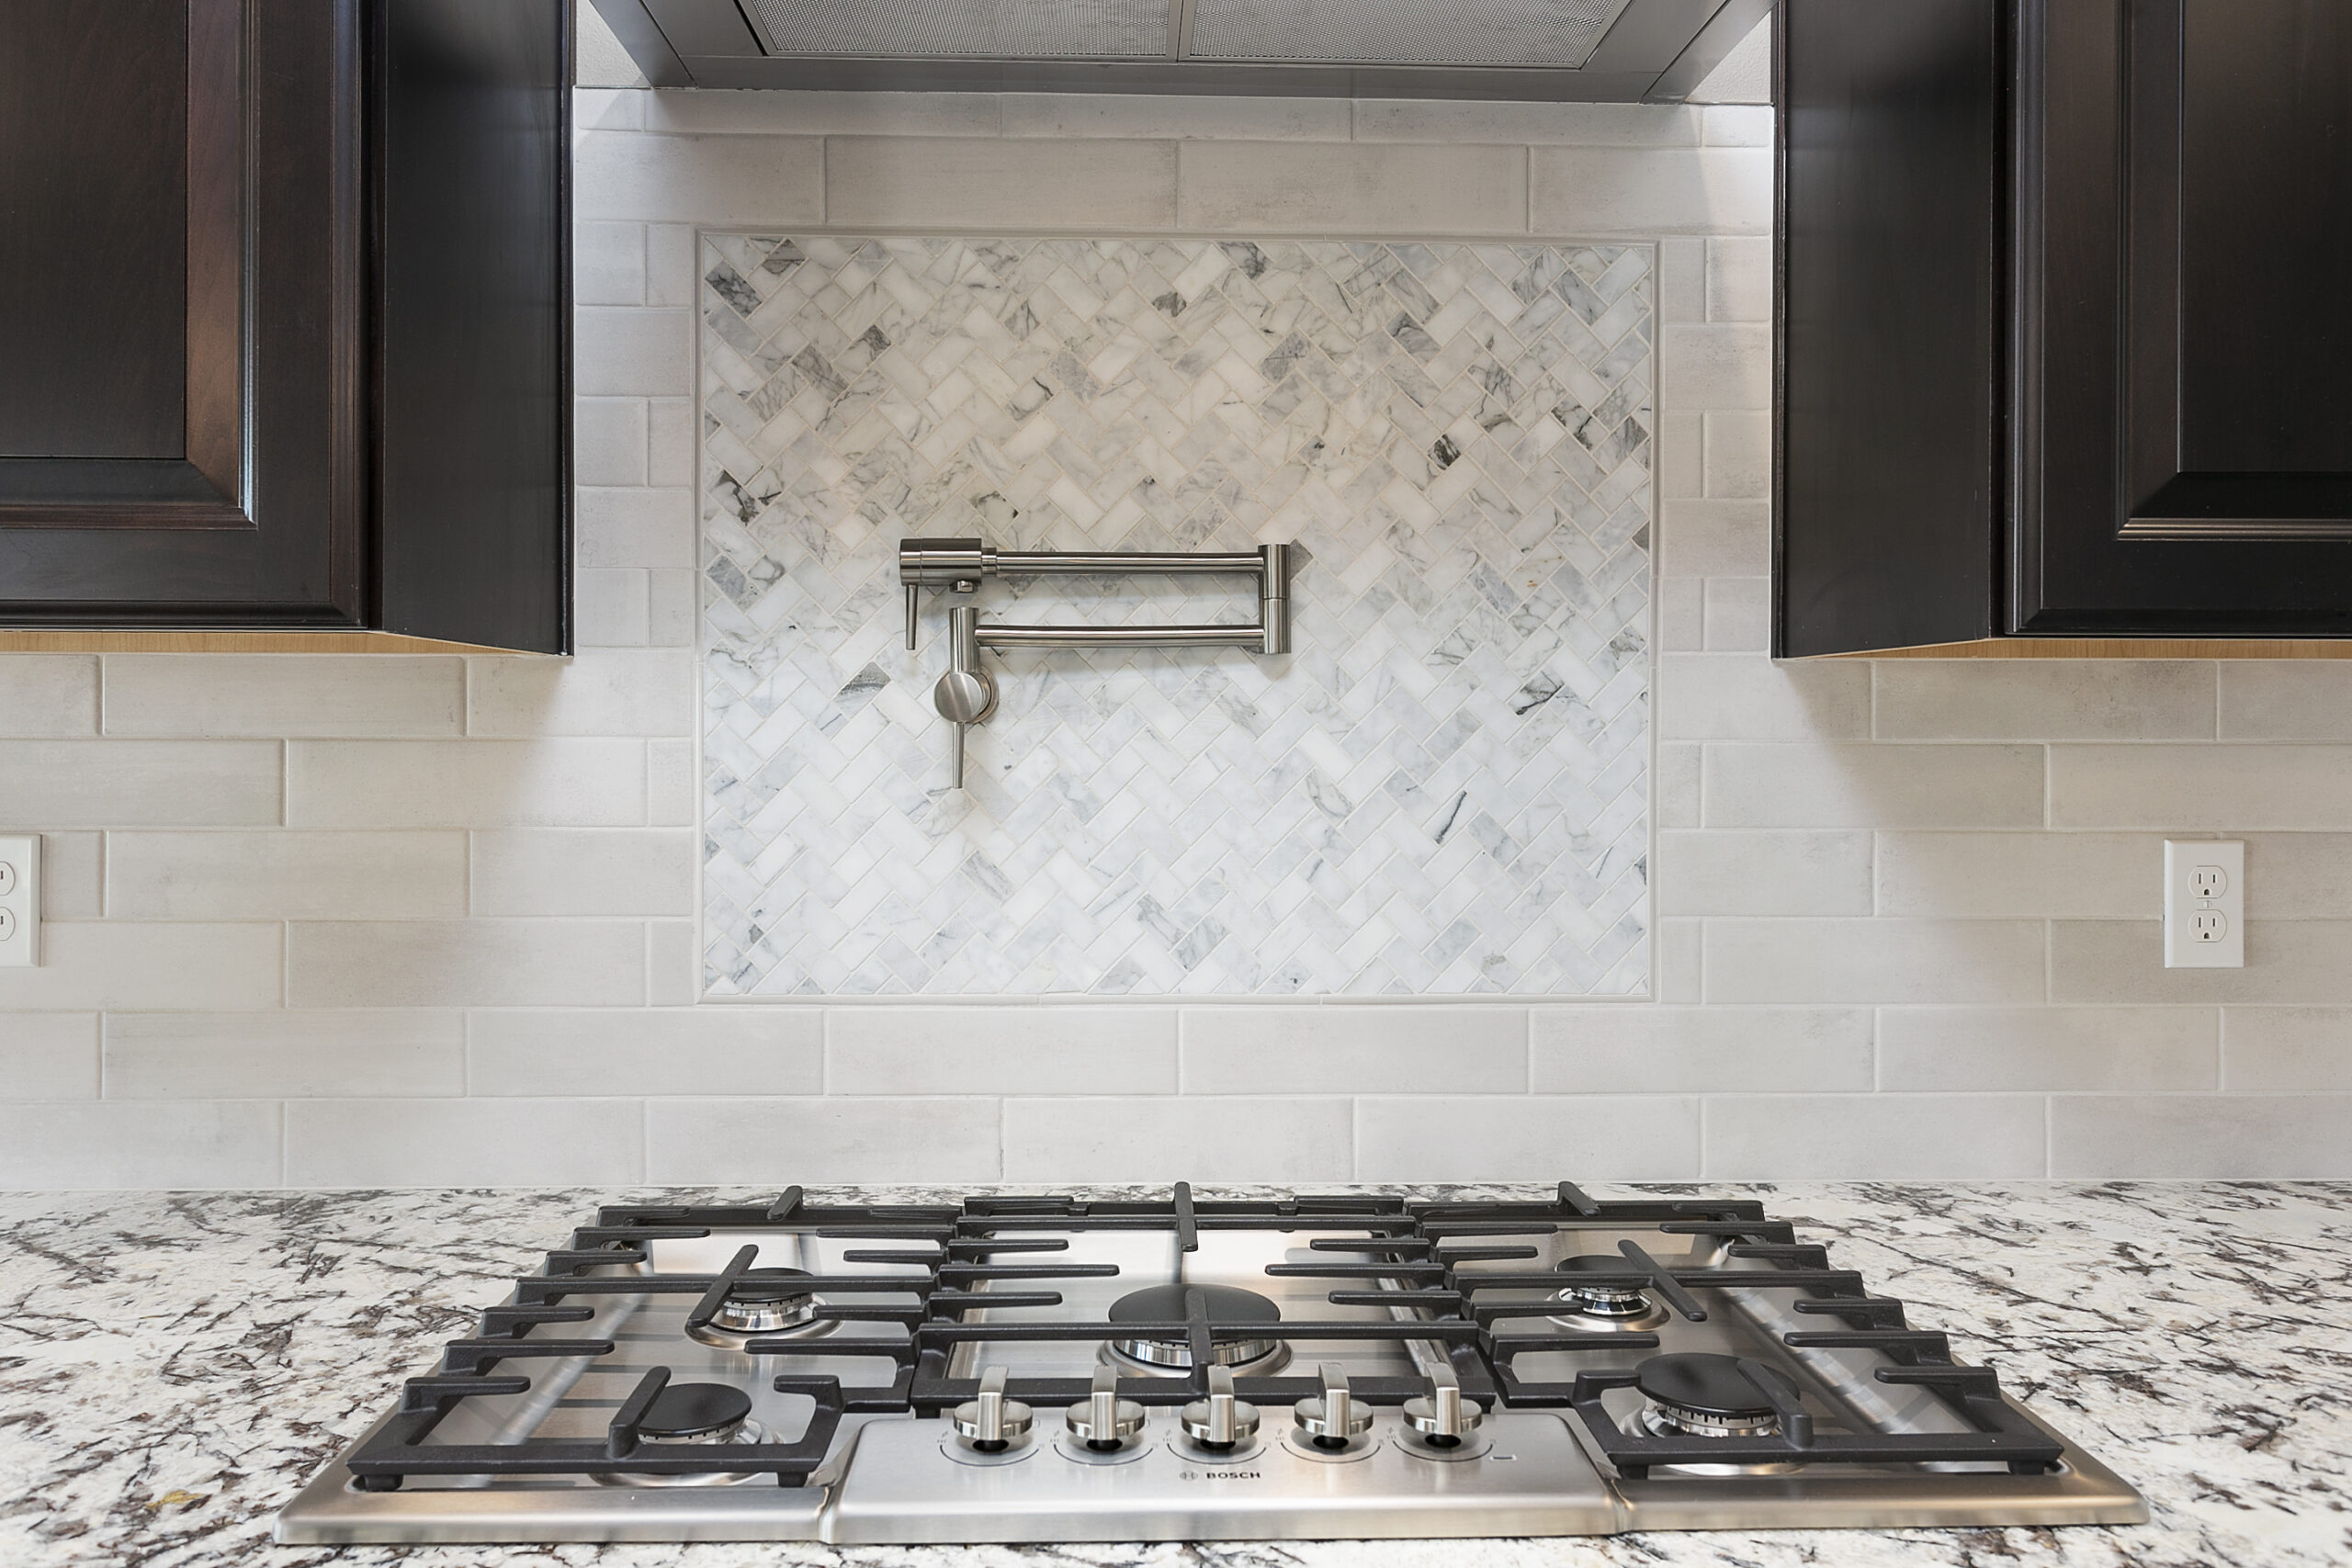 Modern Cooktop with backsplash and water faucet.